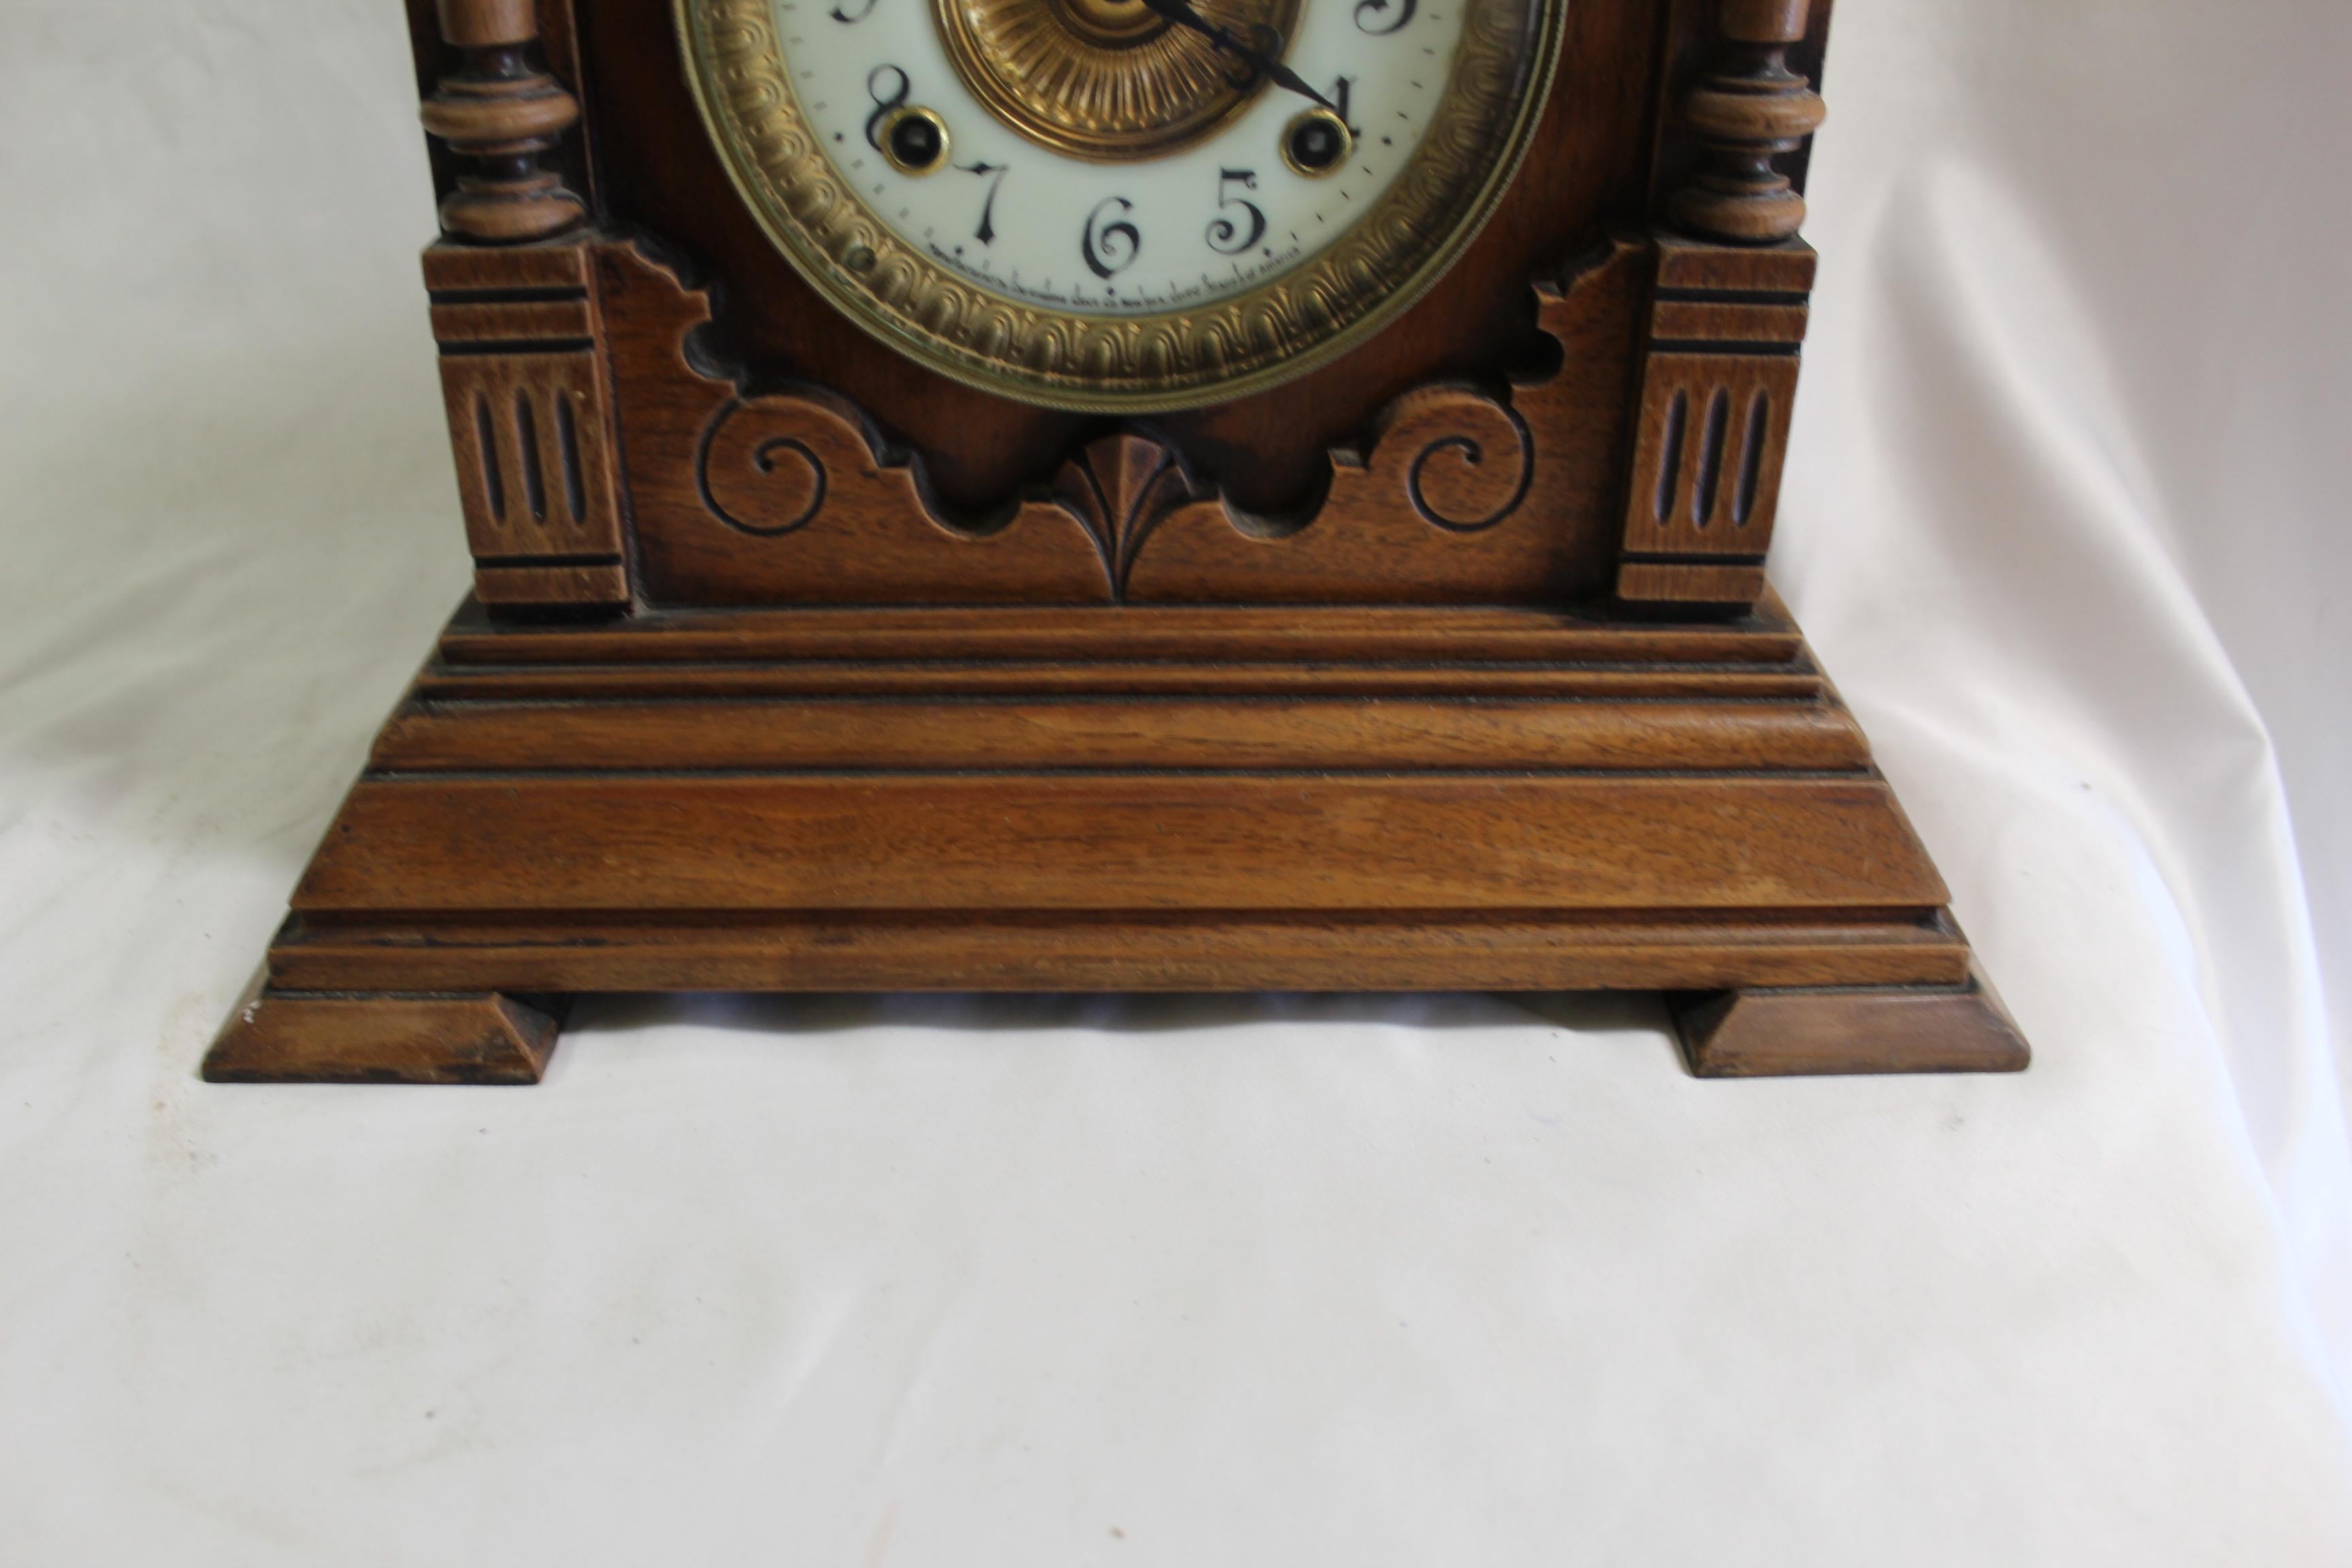 A good looking Clock. Mfg. in New York by Ansonia clock co. Shows label on back. 8 Day striker . Movement is marked as well and date 1878 ! Clock has an American Brass Eagle on top. Dial is in great condition. This will have to be packed well for